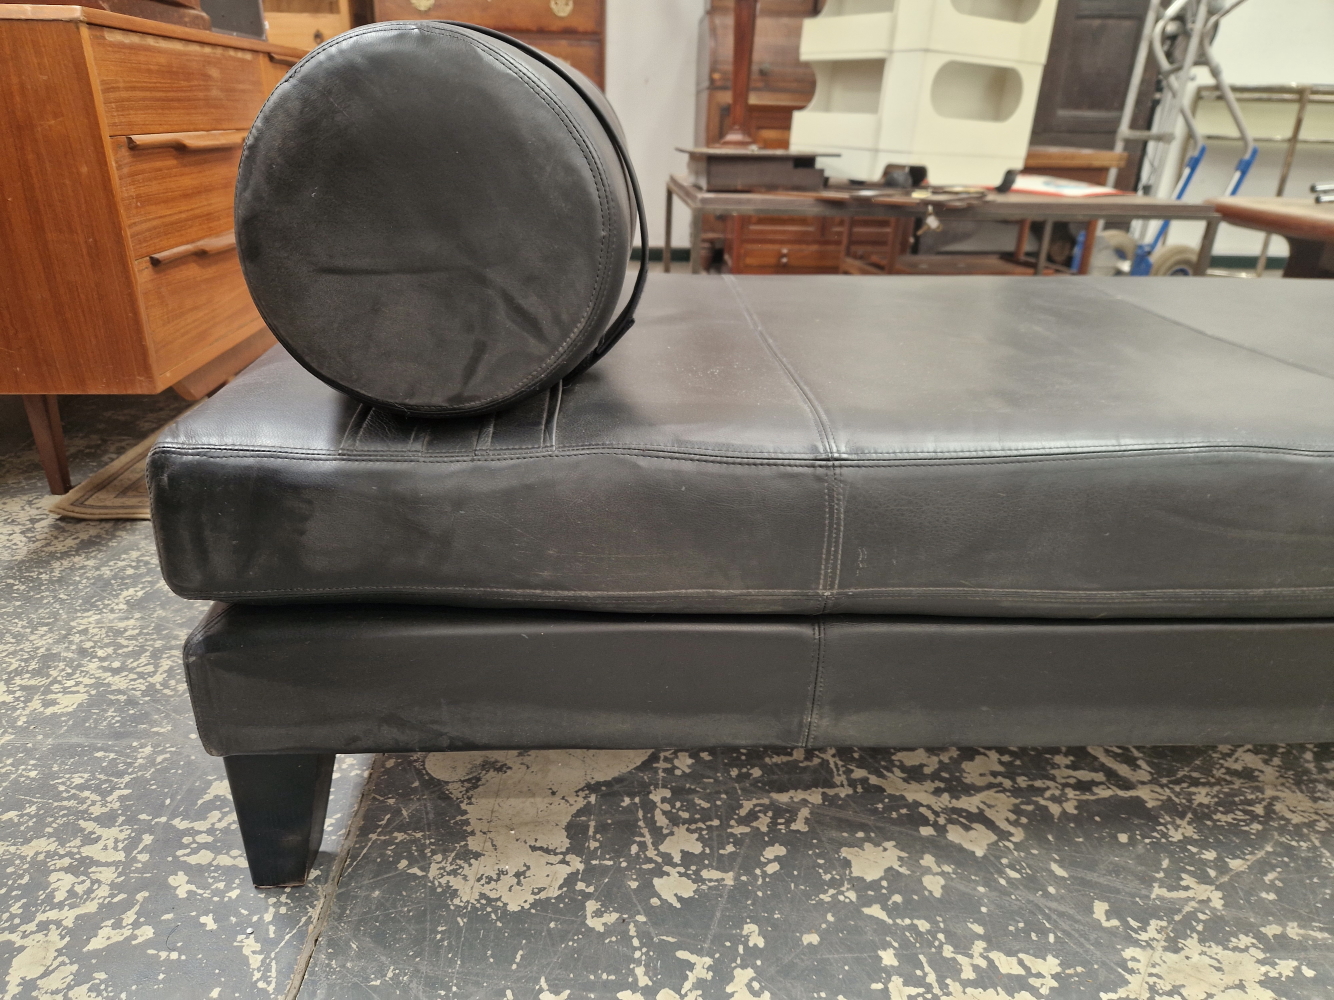 A CONTEMPORARY BLACK UPHOLSTERED CHAISE LONGUE, THE RECTANGULAR SHAPE WITH A CYLINDRICAL CUSHION END - Image 2 of 3